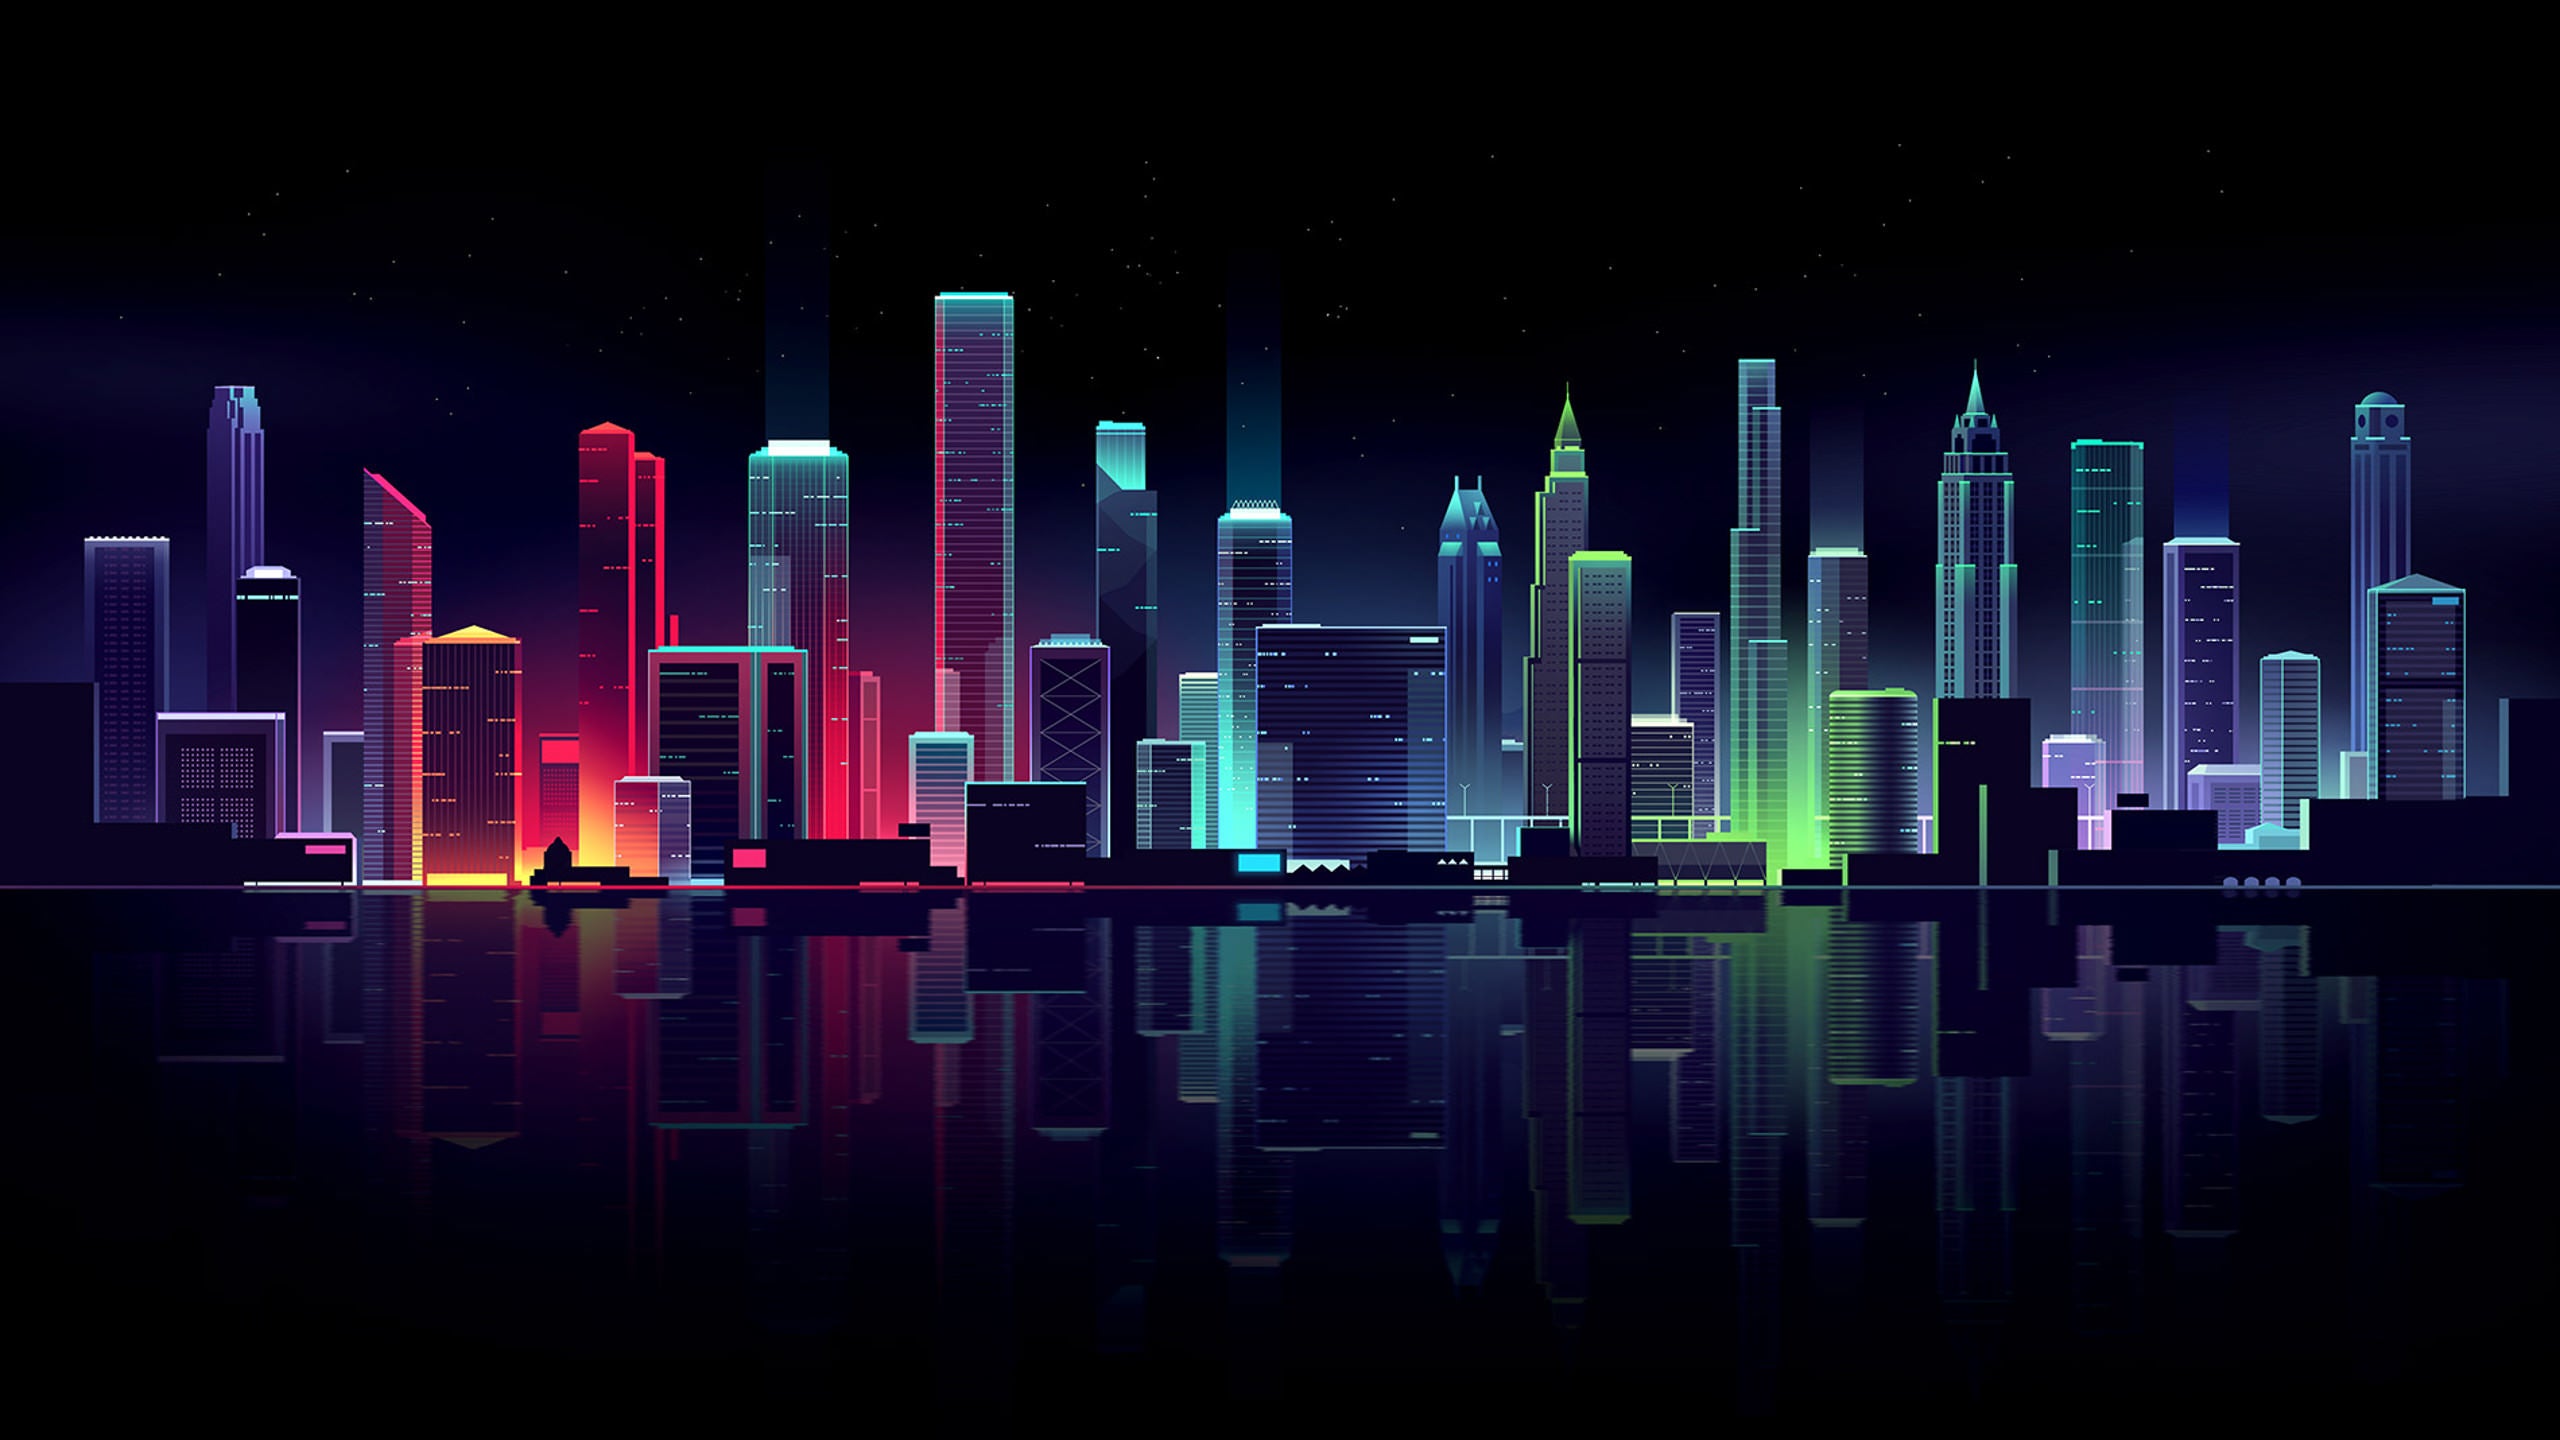 Skyline 4K wallpapers for your desktop or mobile screen free and easy